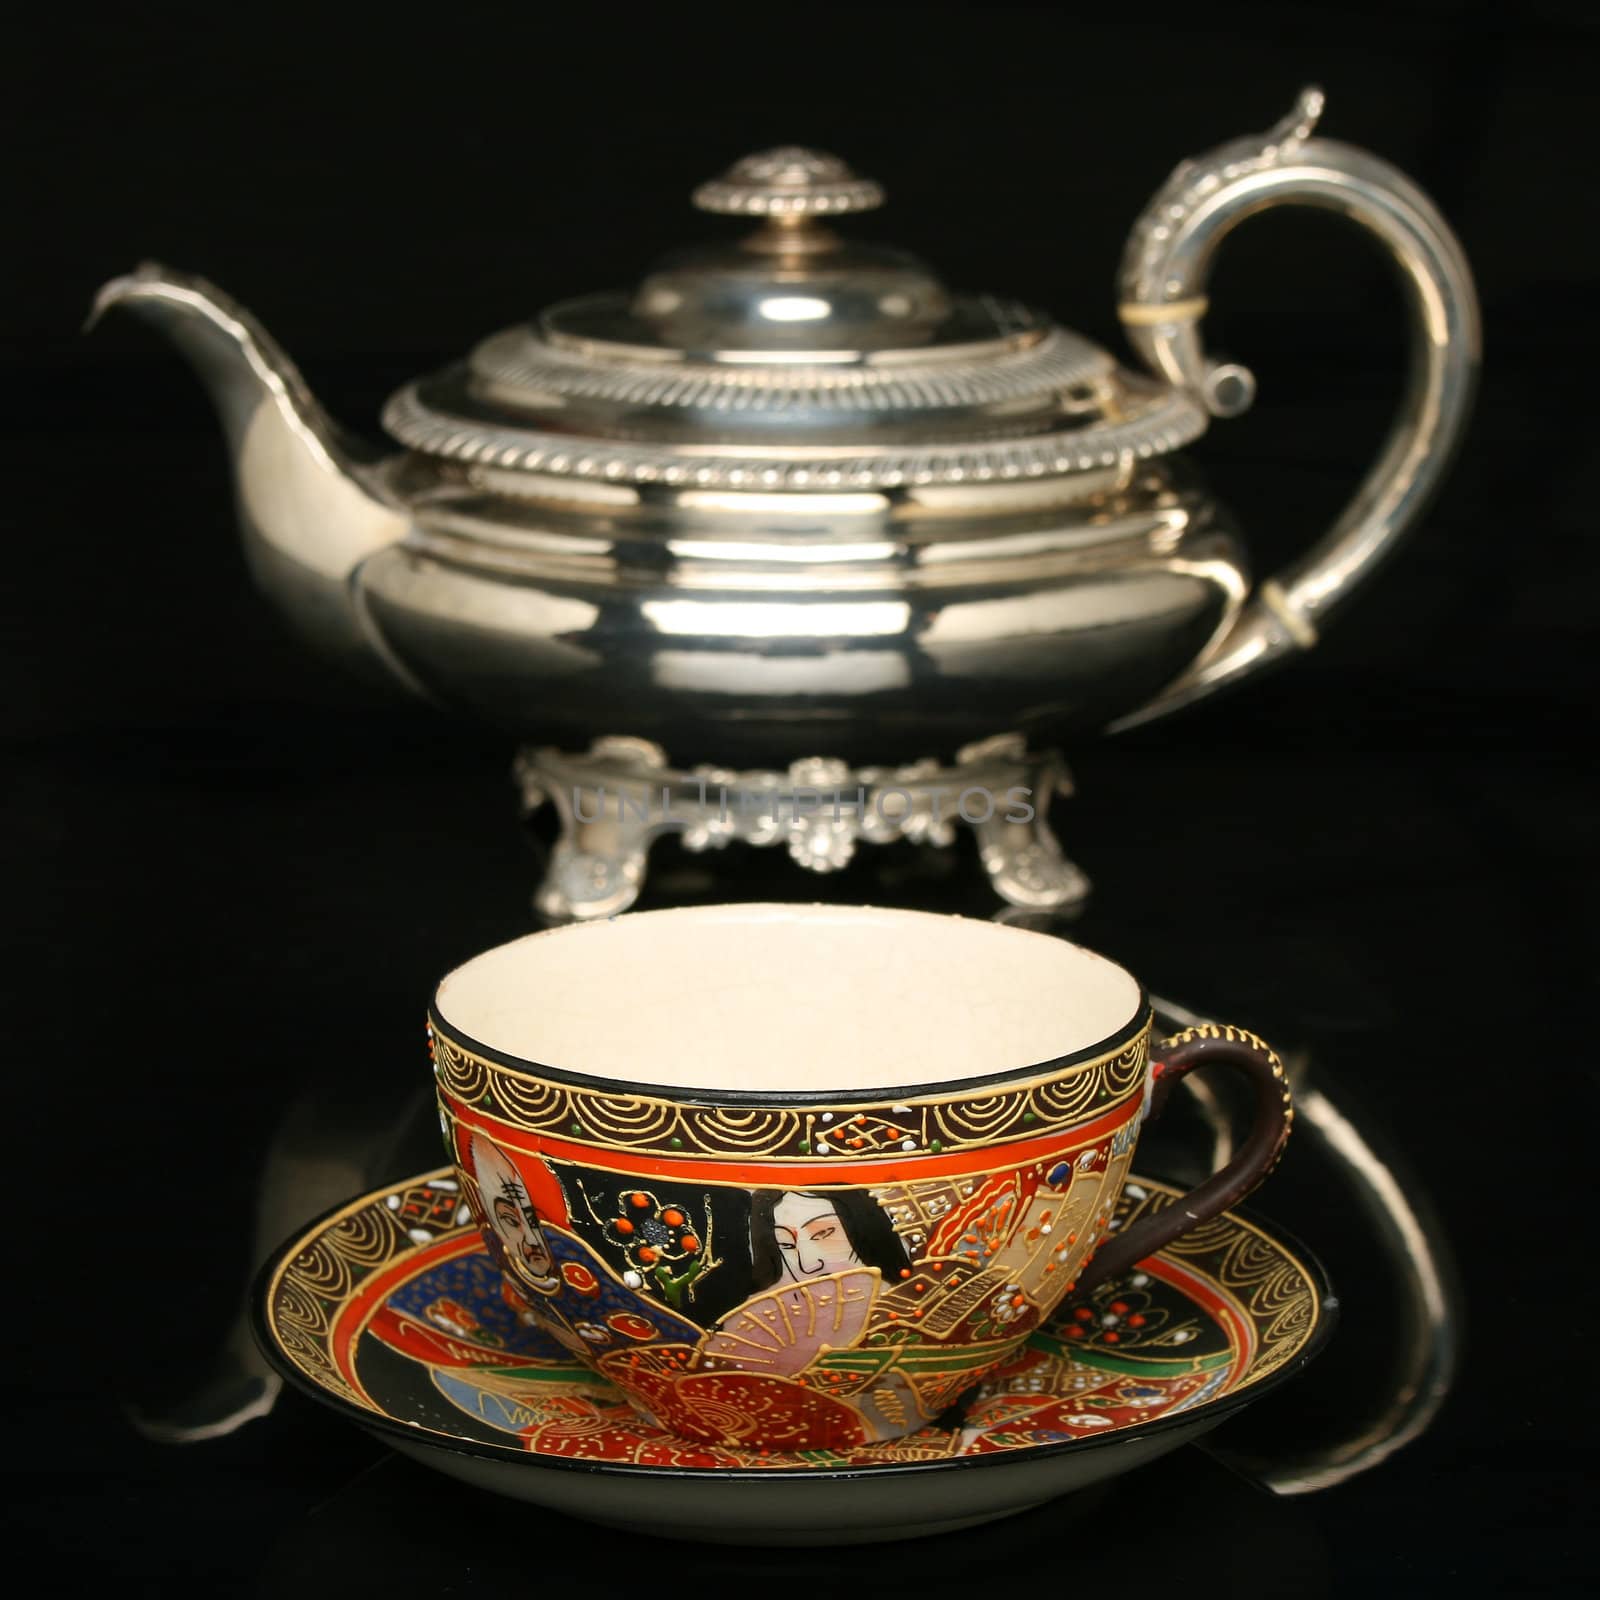 Silver teapot and an antique chinese cup of tea by Erdosain